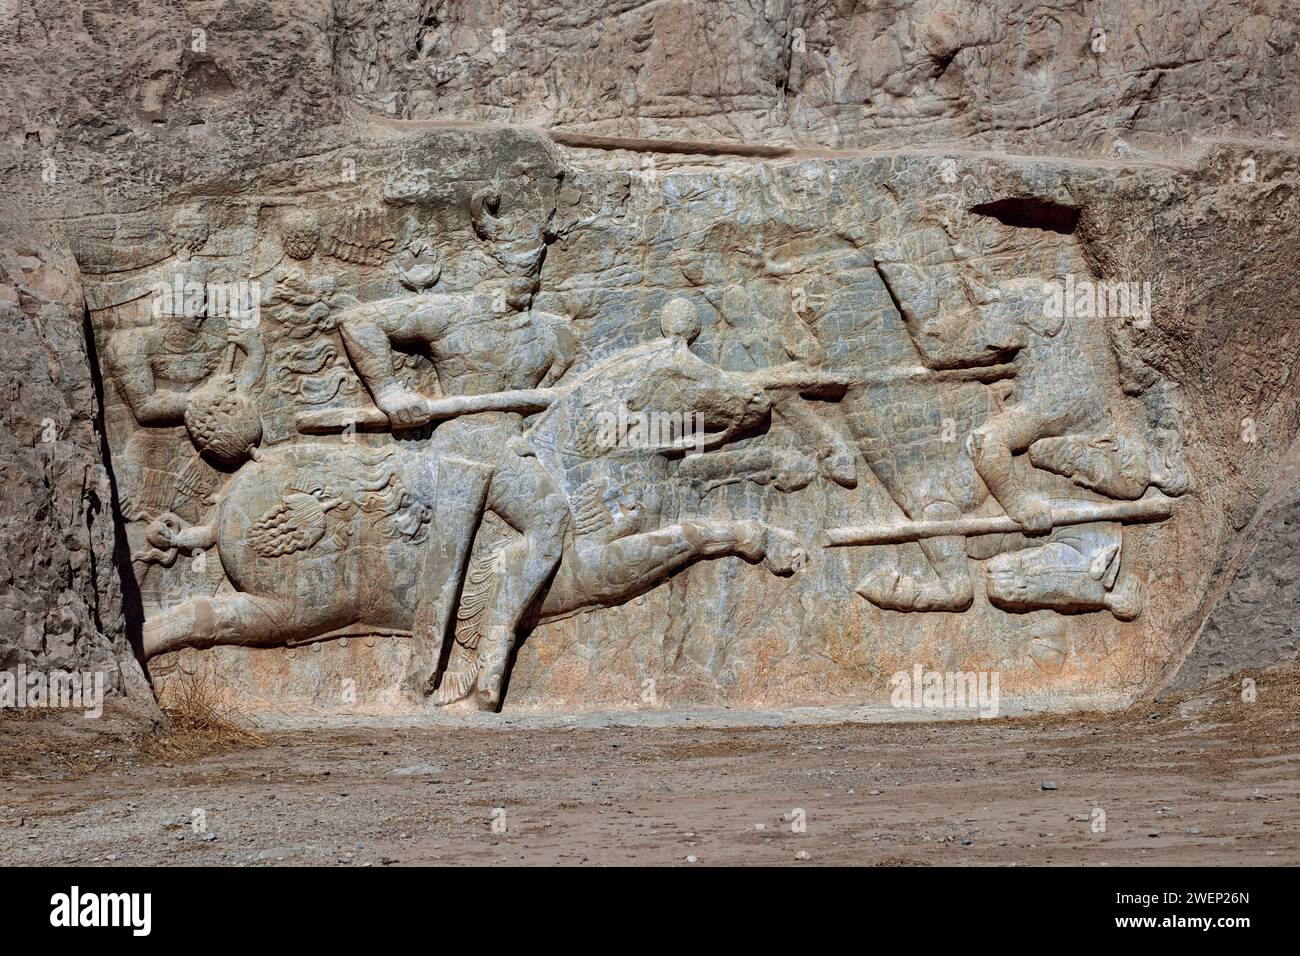 Rock relief depicts the equestrian victory of Hormizd II, Sassanid king (303-309 AD) of Persia, over a mounted foe. Naqsh-e Rostam Necropolis, Iran. Stock Photo